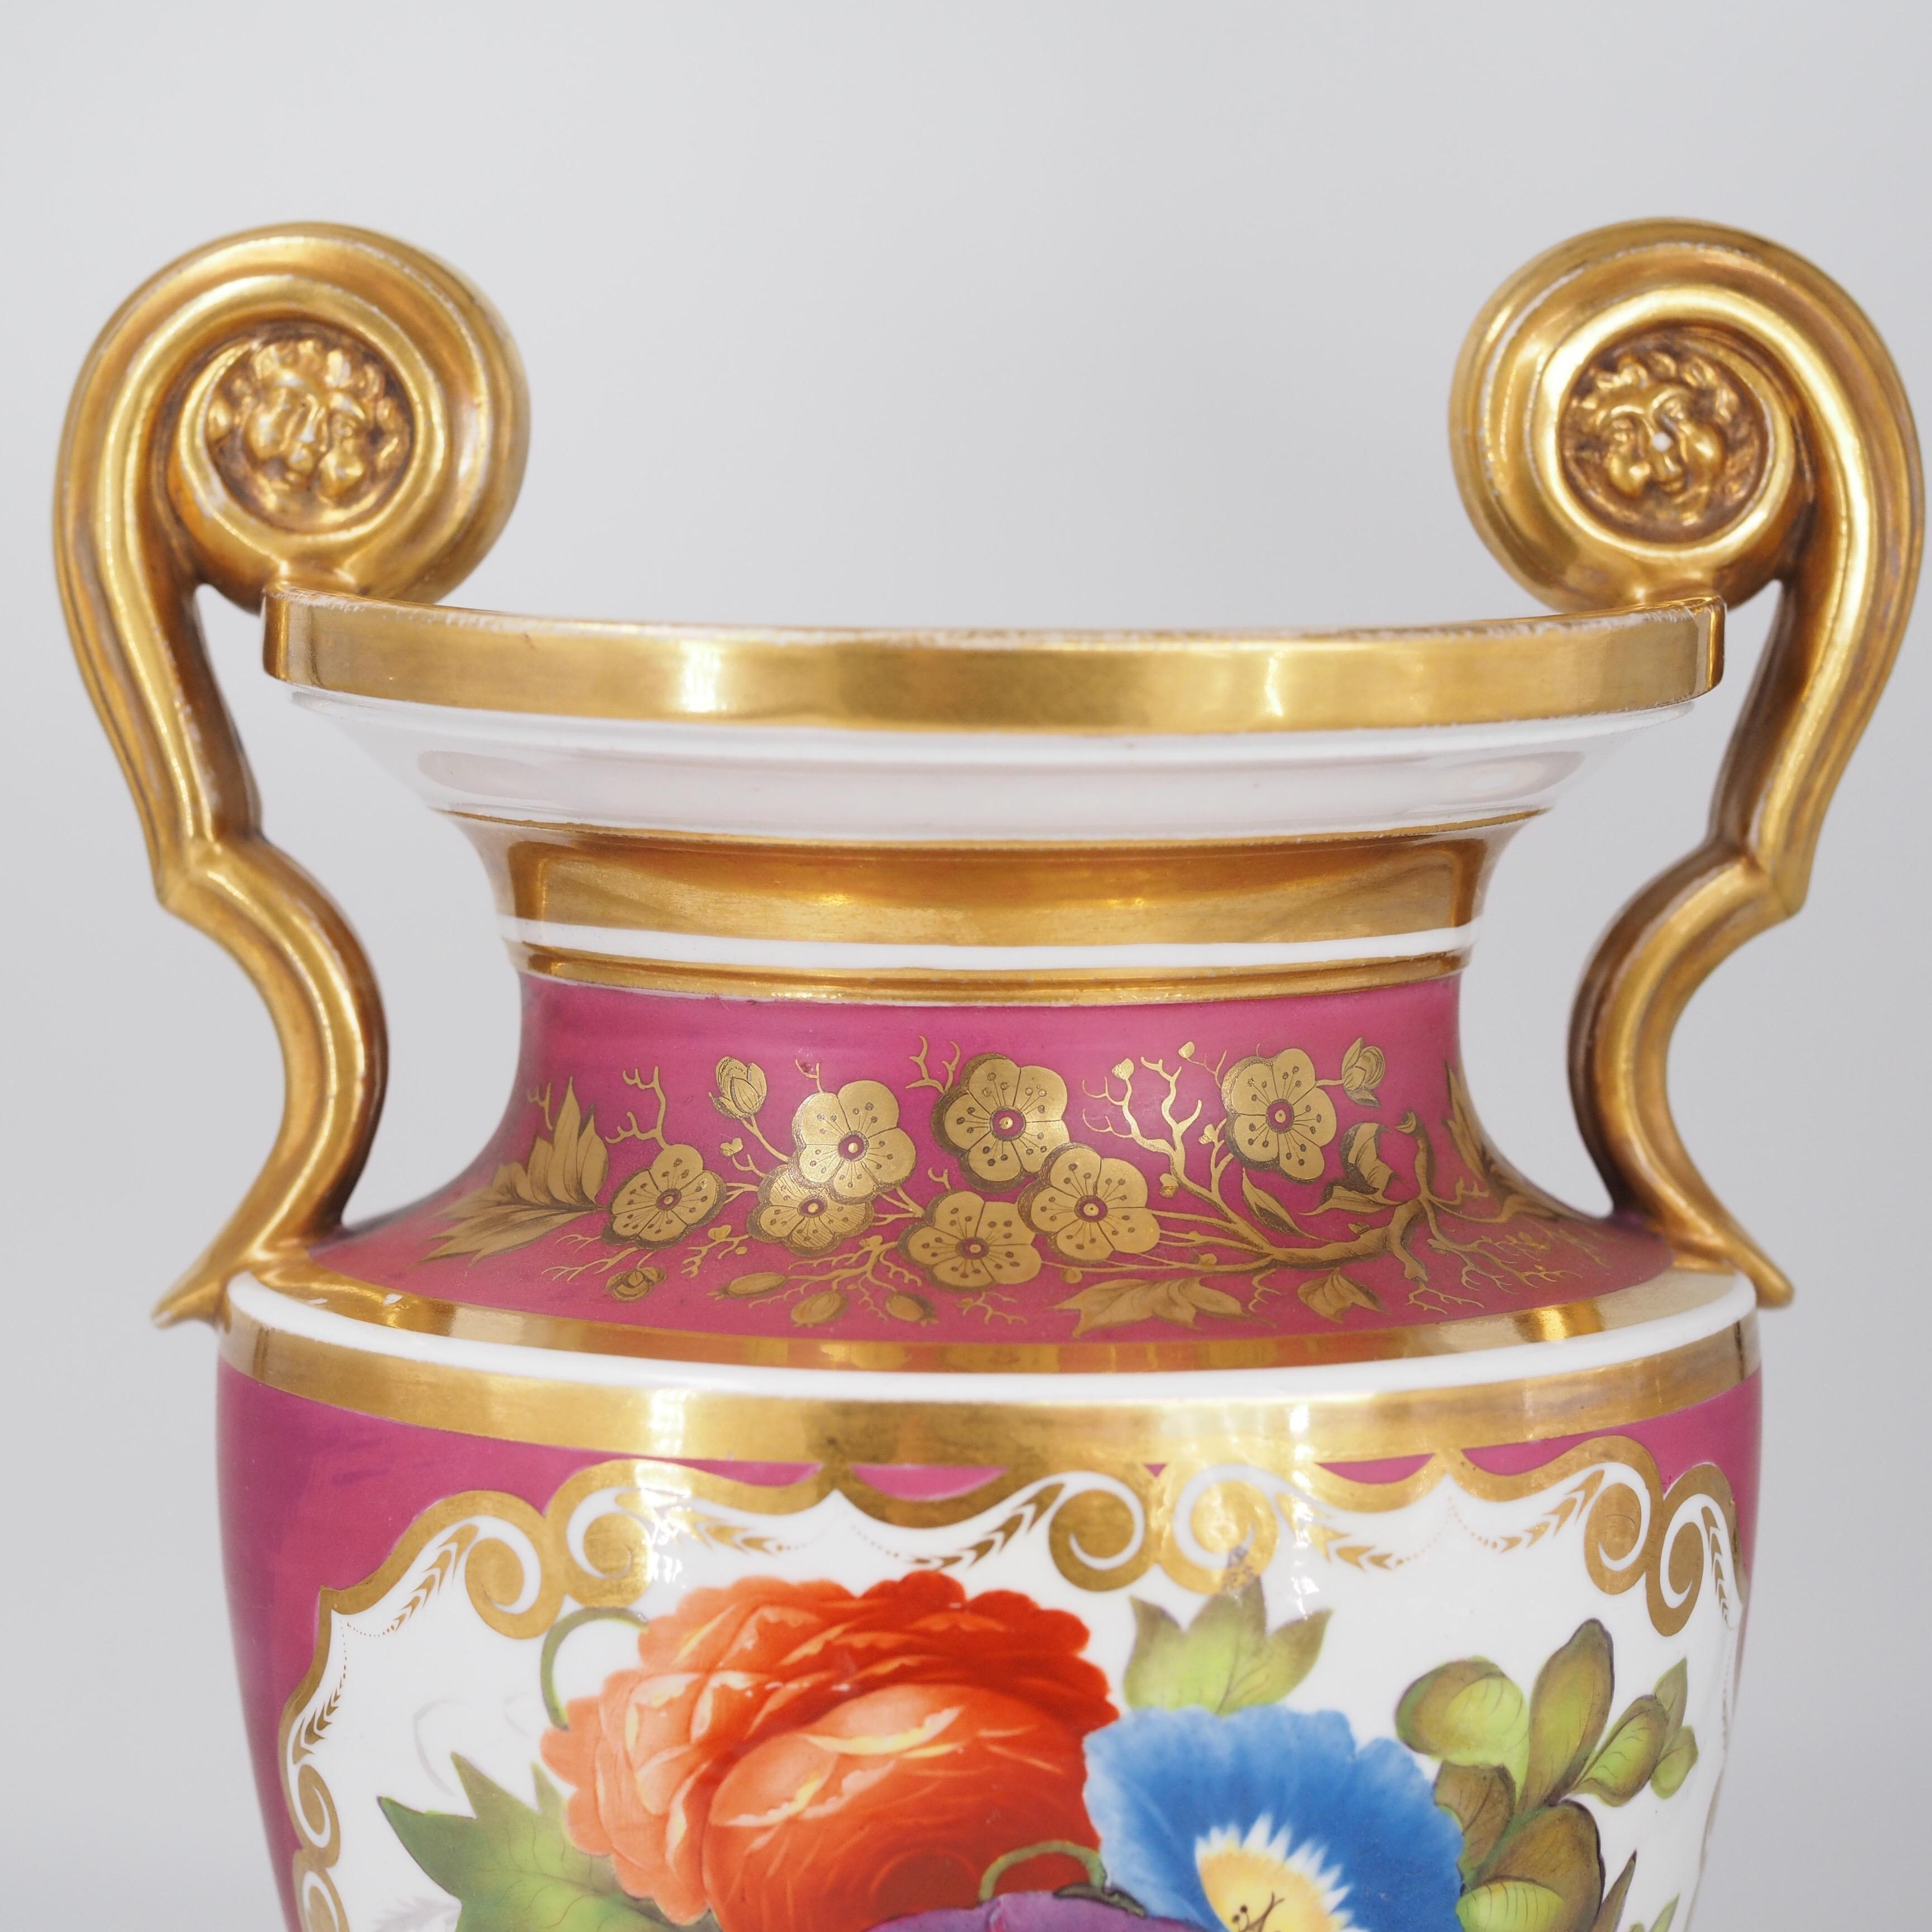 English Porcelain Classical Vase with Flower Panels, Claret Ground, c. 1825 For Sale 1